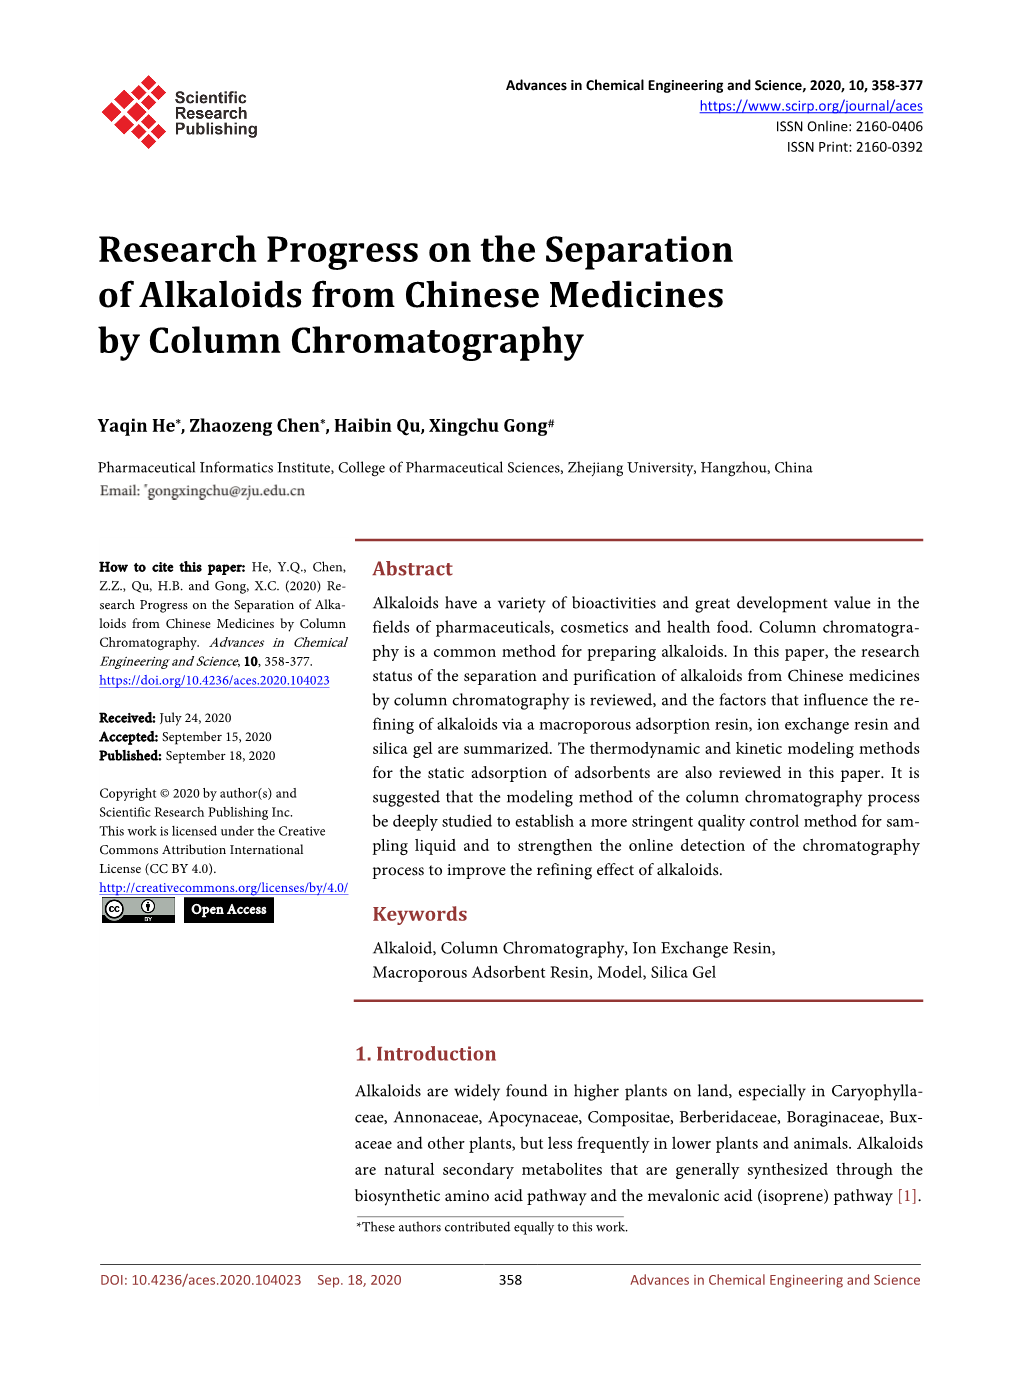 Research Progress on the Separation of Alkaloids from Chinese Medicines by Column Chromatography